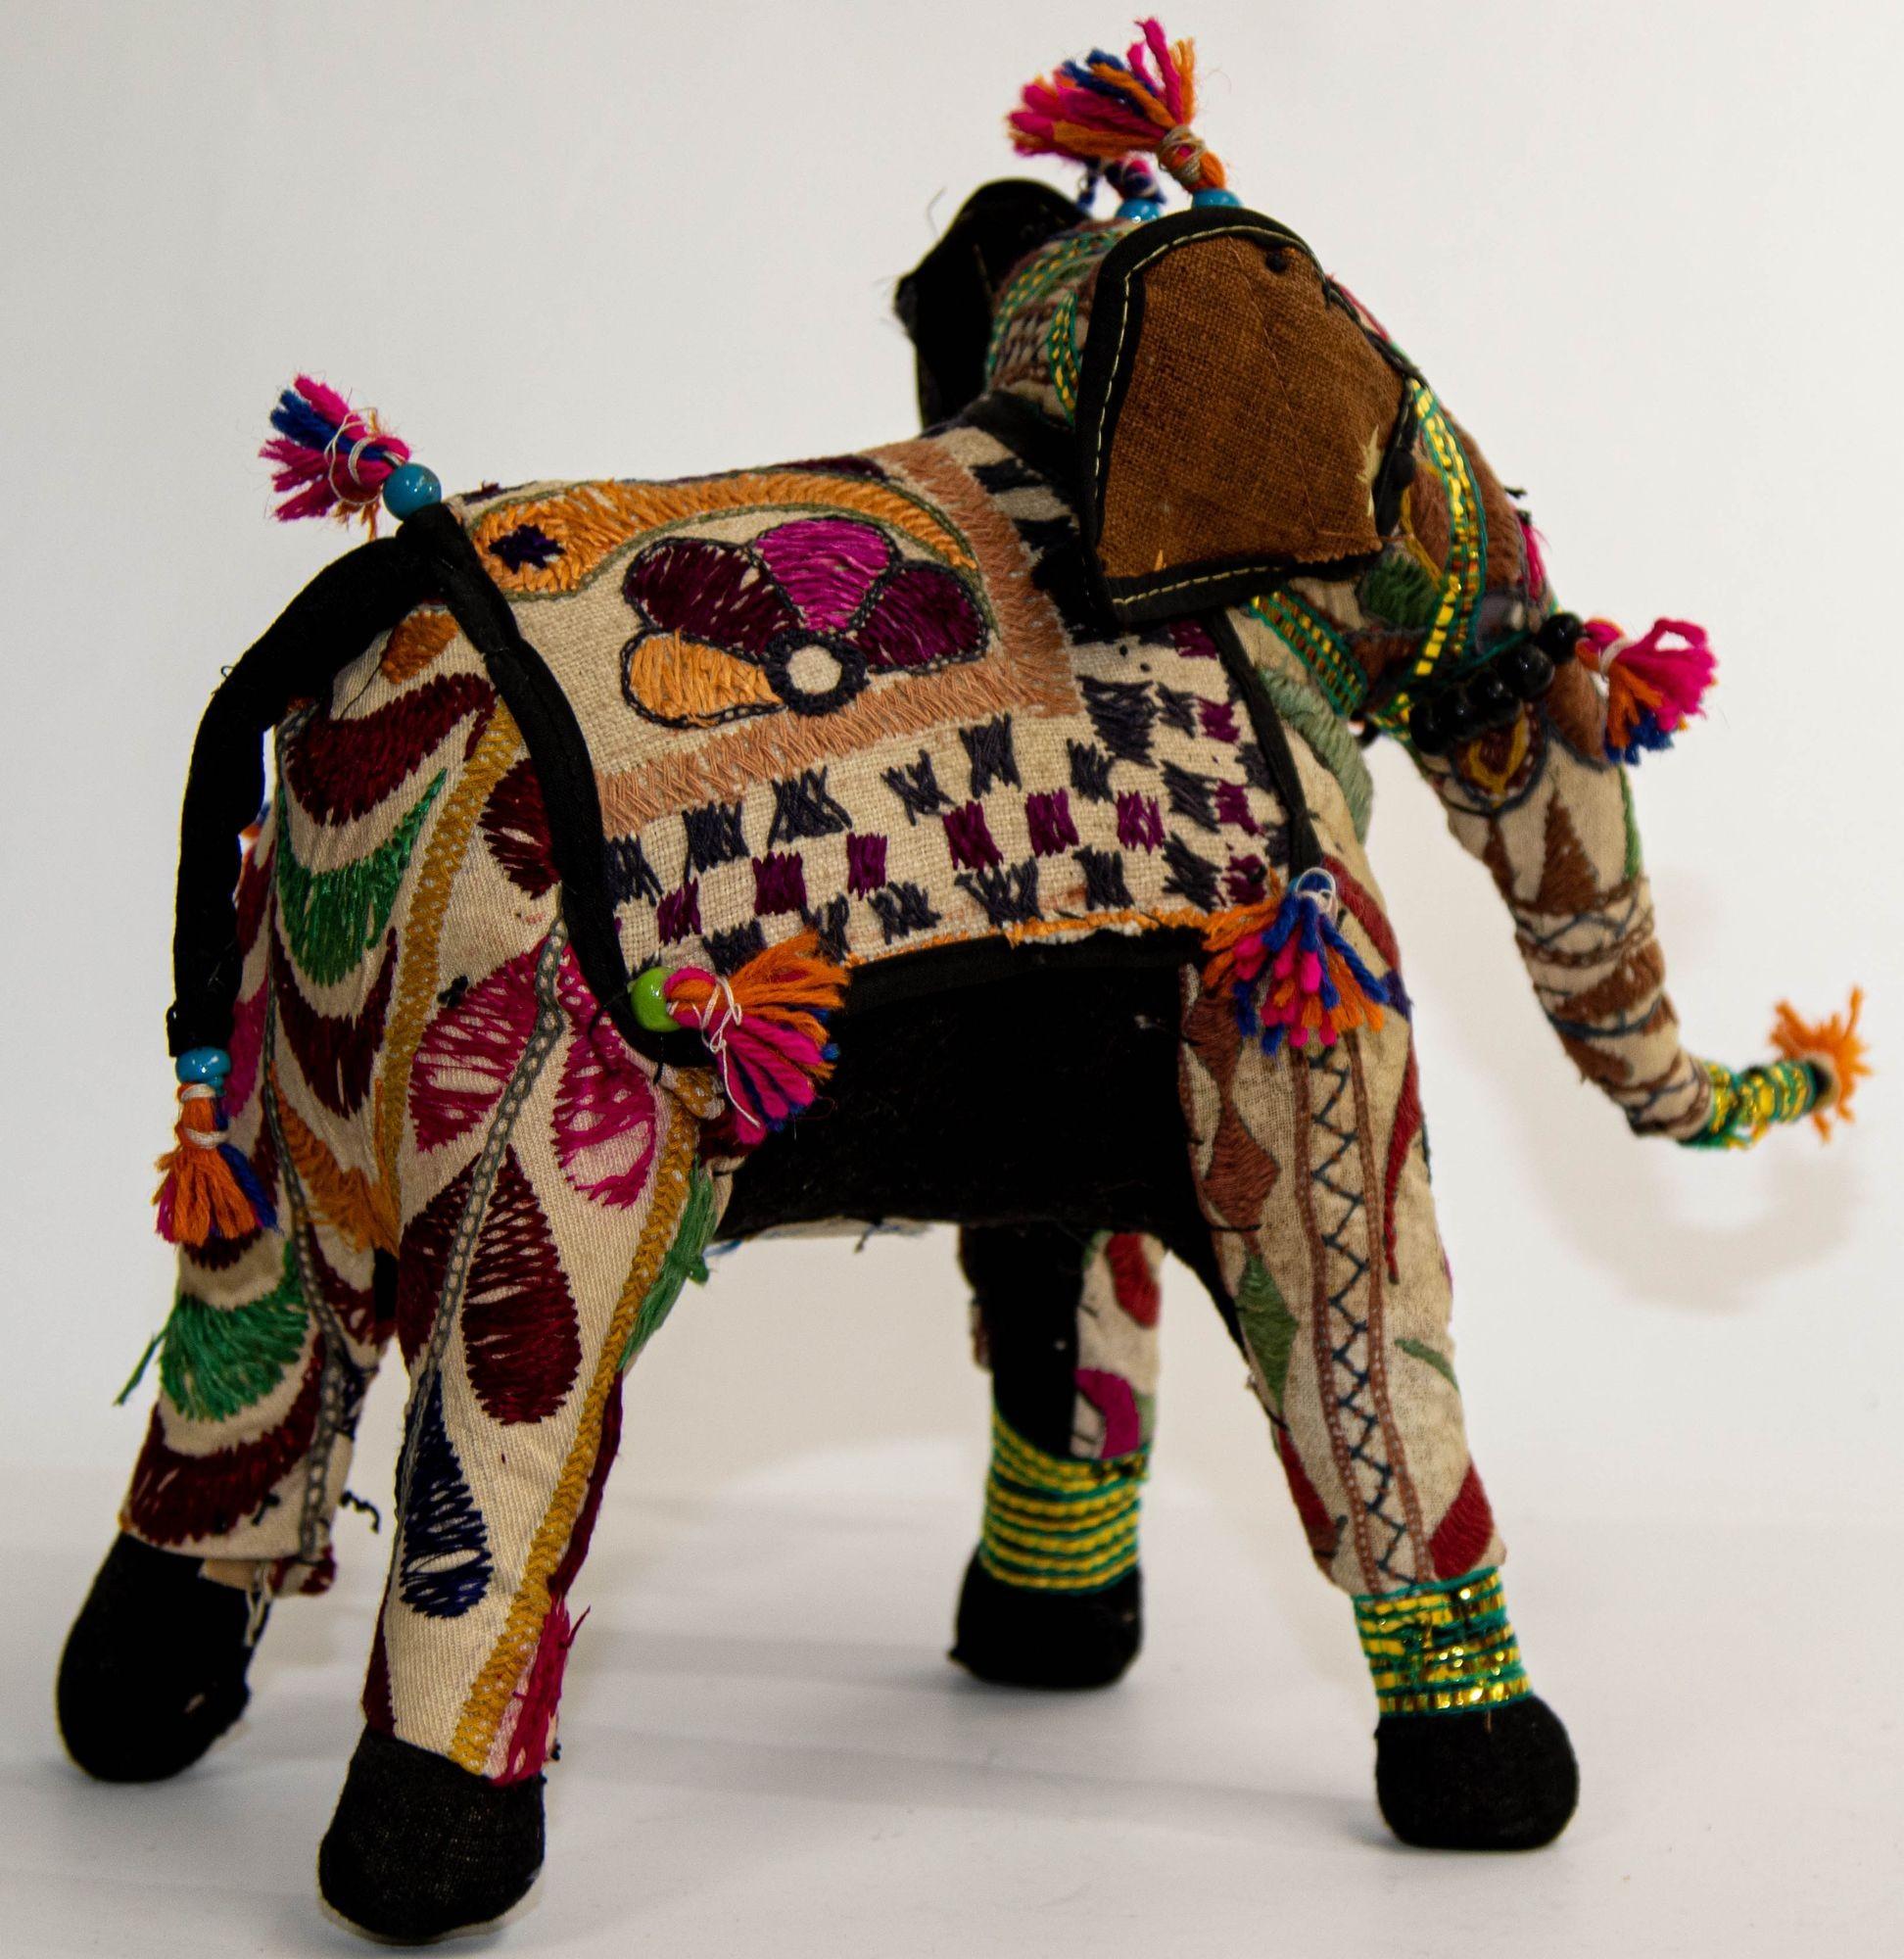 Vintage Raj Hand-Crafted Stuffed Cotton Embroidered Elephant, India, 1950 For Sale 2